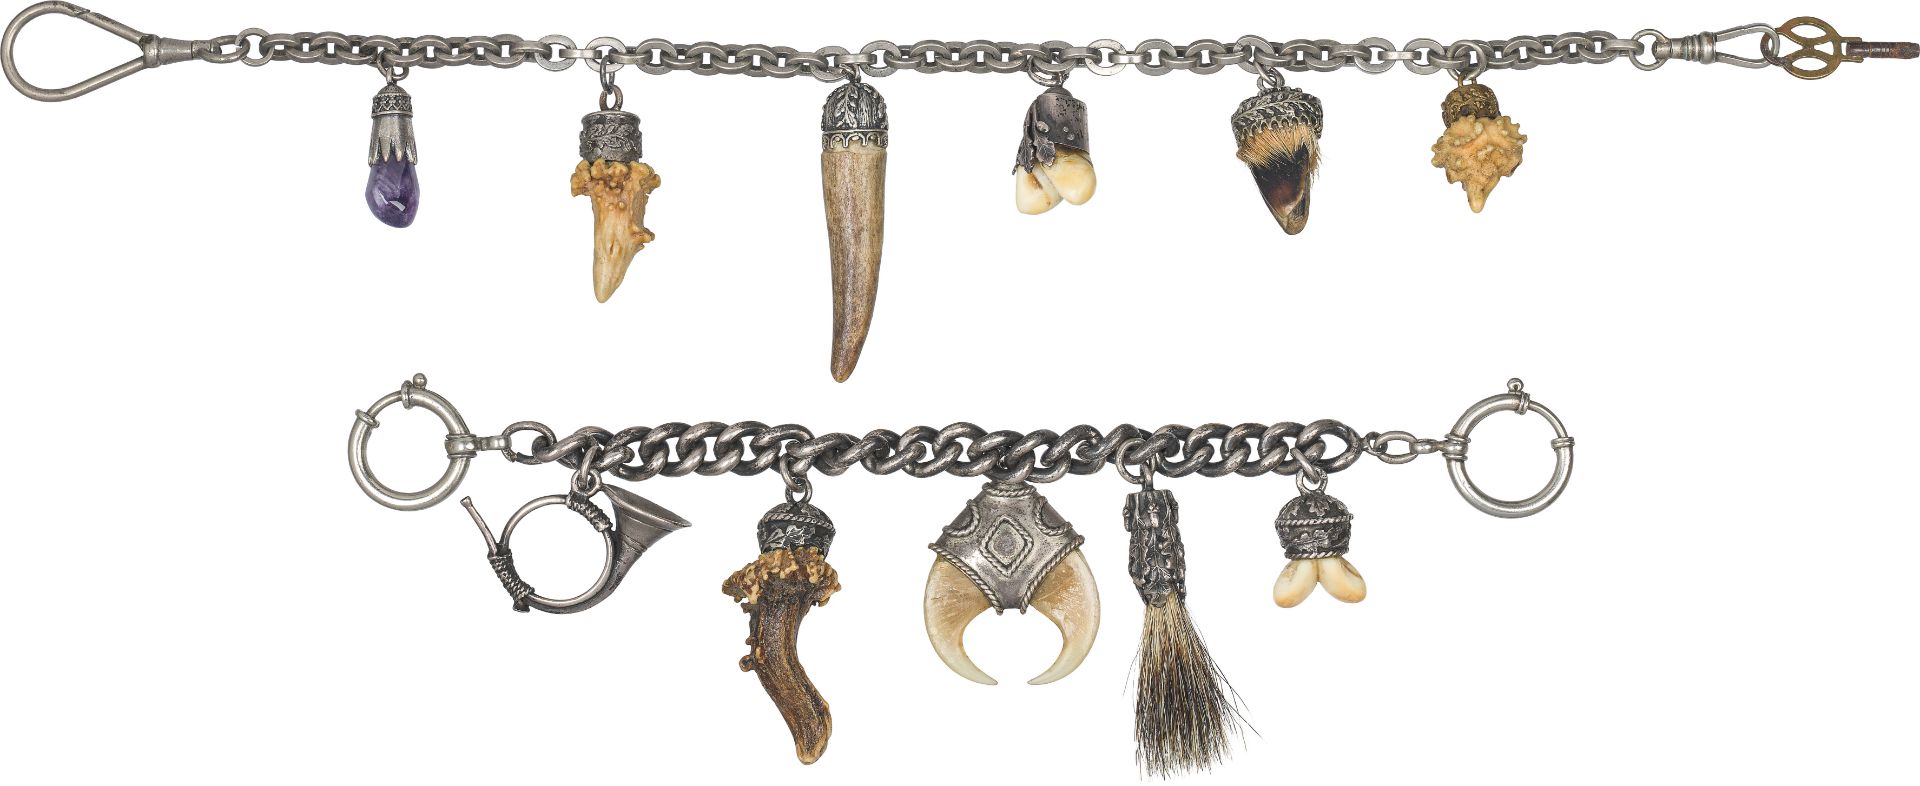 2 Fob chains with 12 pendantssilver, horn, amethyst, teeth, goatsbeard; 2 fob chains with 12